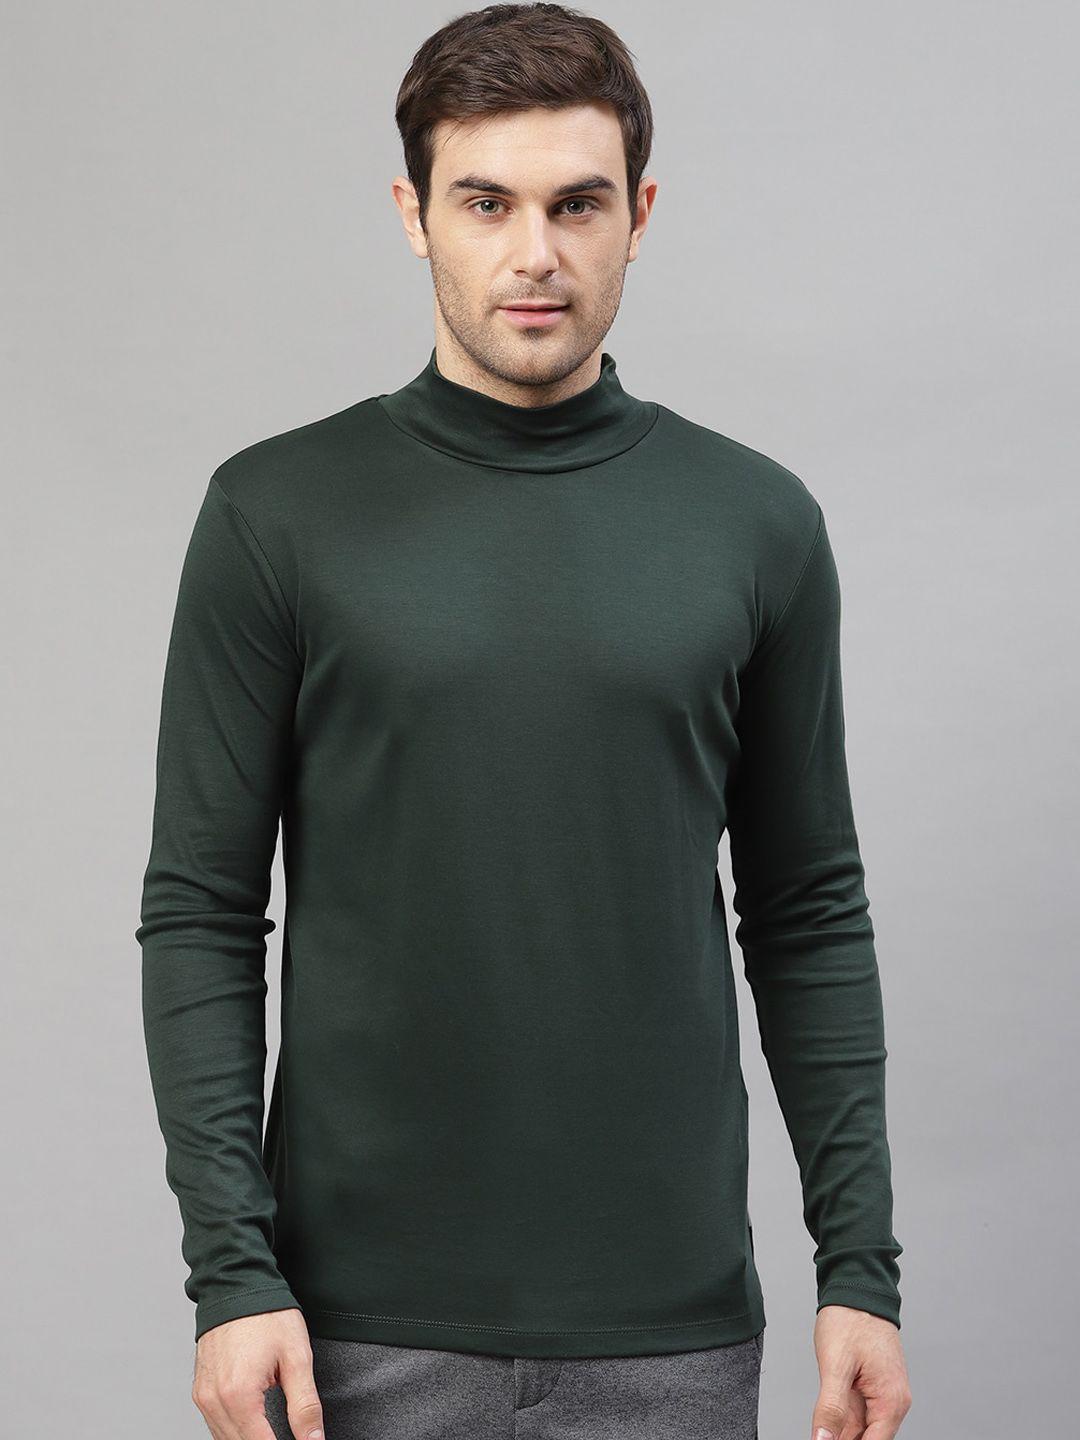 lindbergh-men-green-solid-knitted-pullover